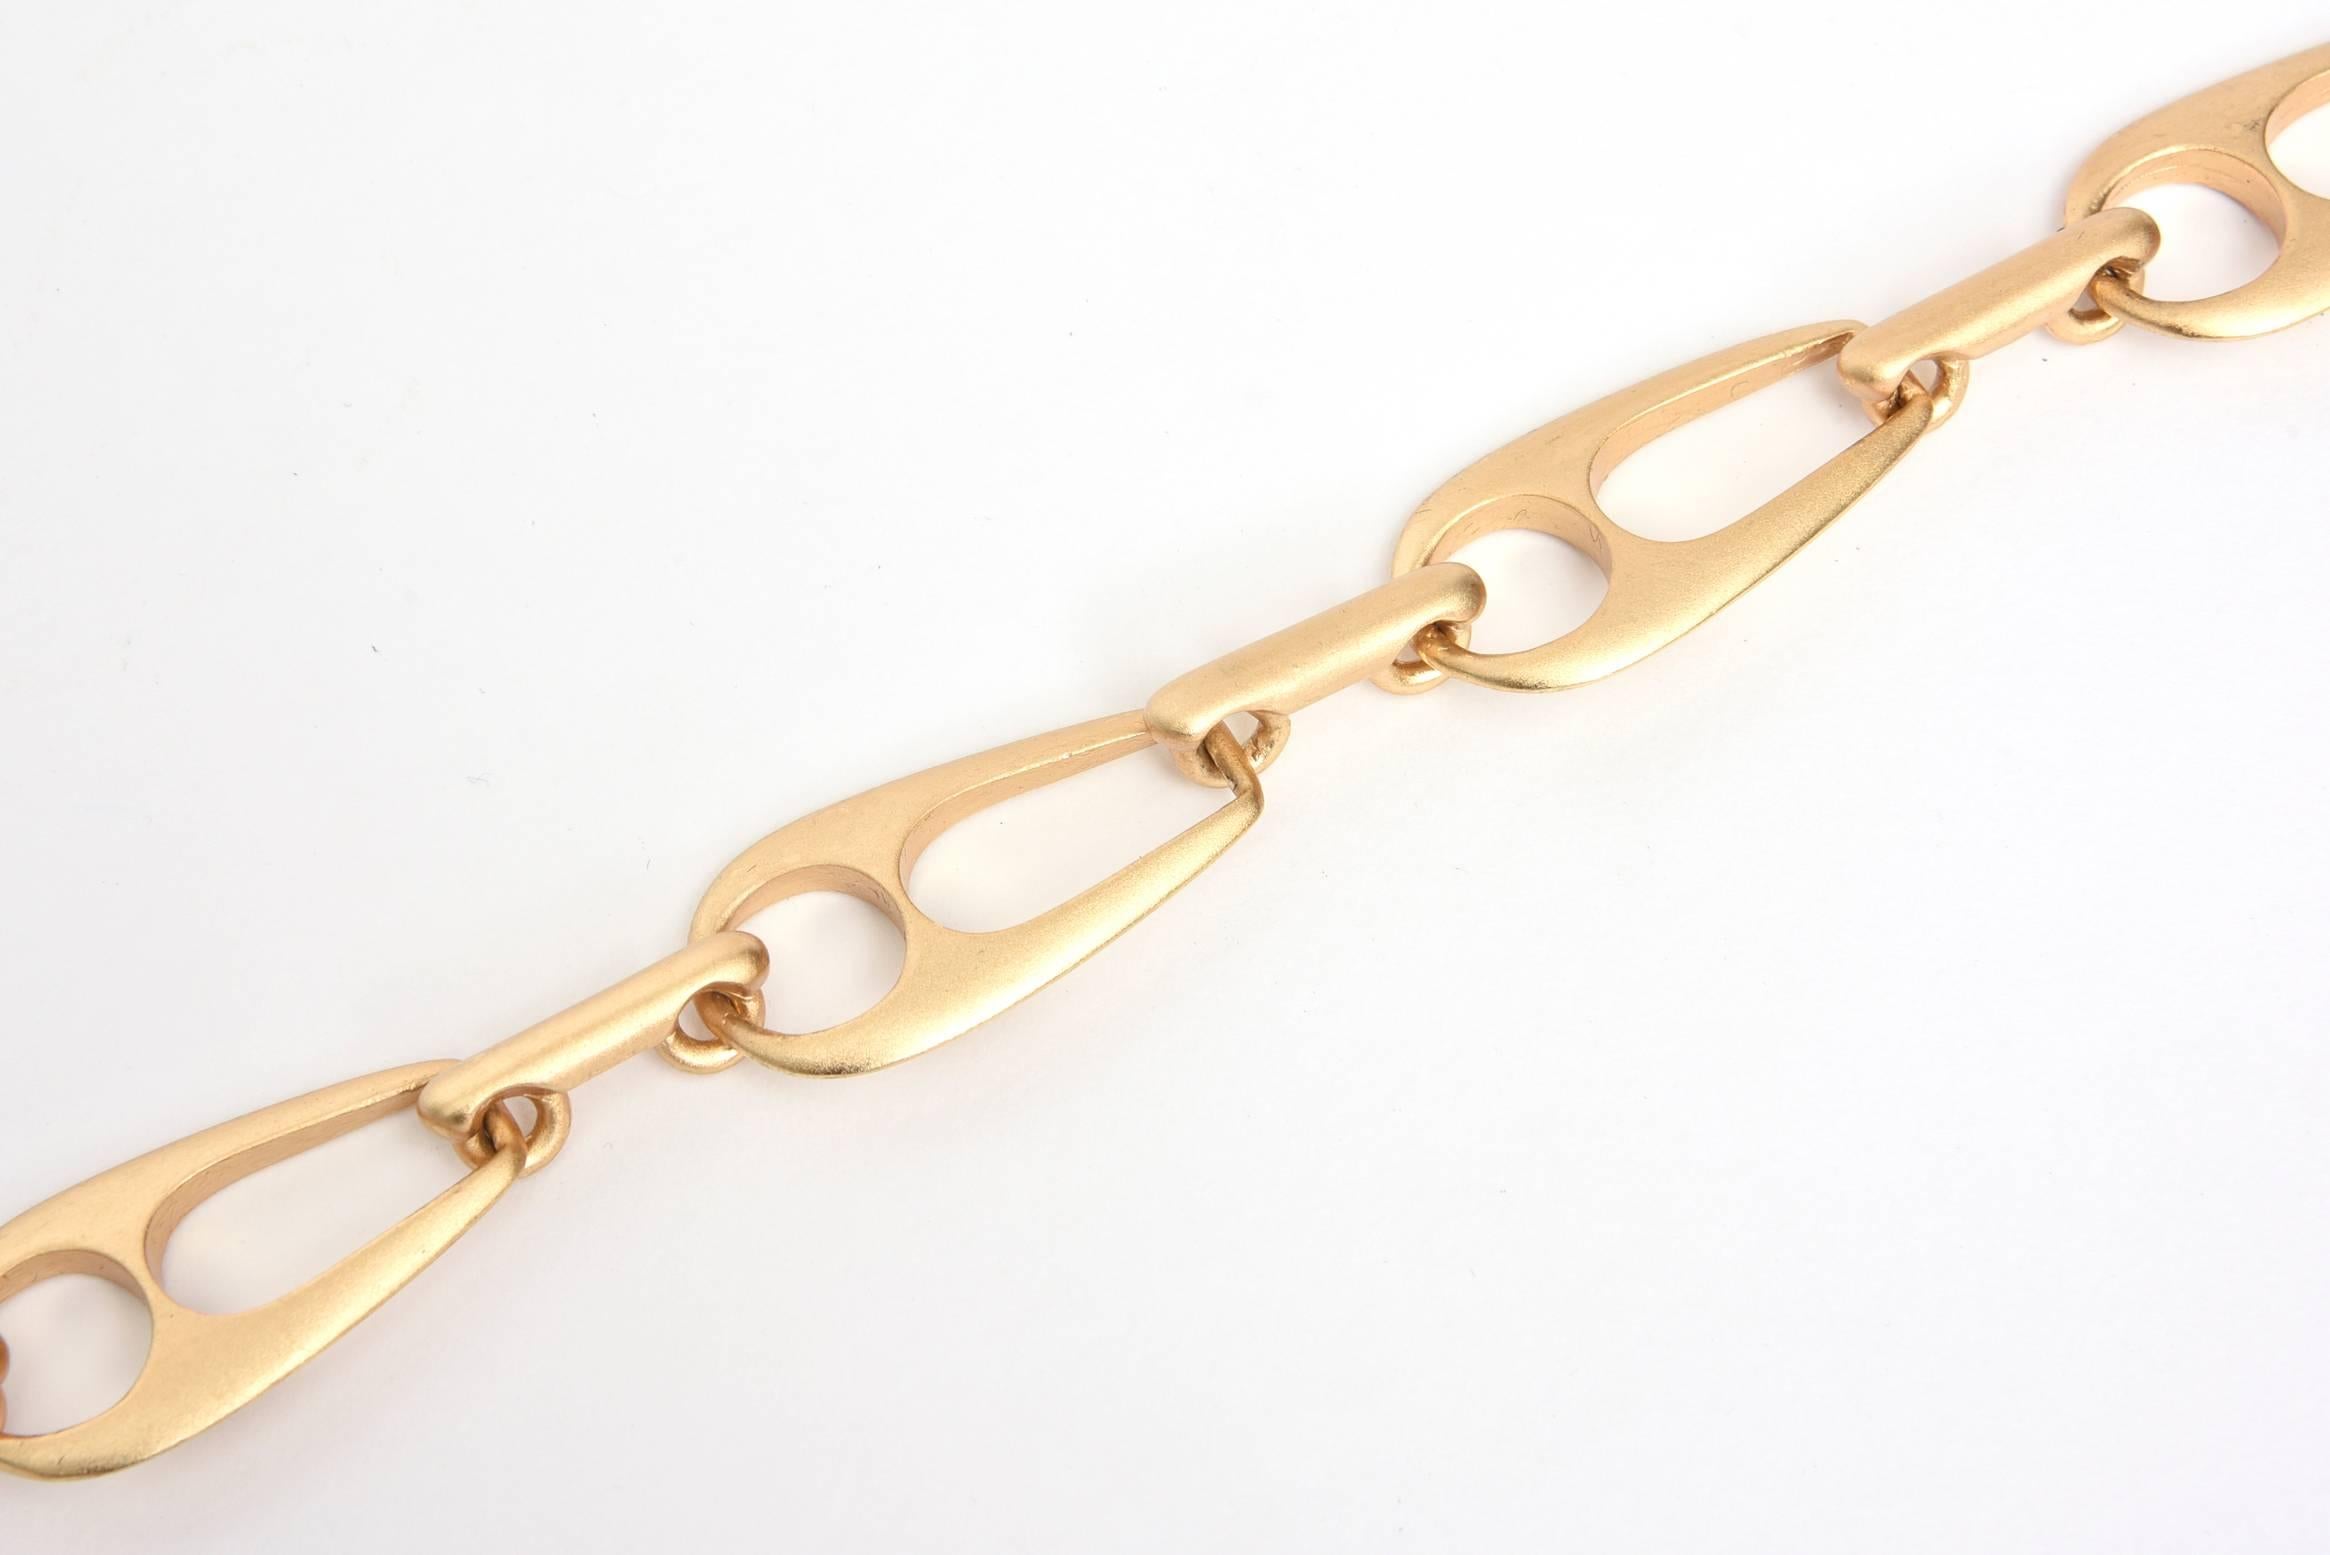  Sculptural Link Necklace Attributed to Alexis Kirk 3